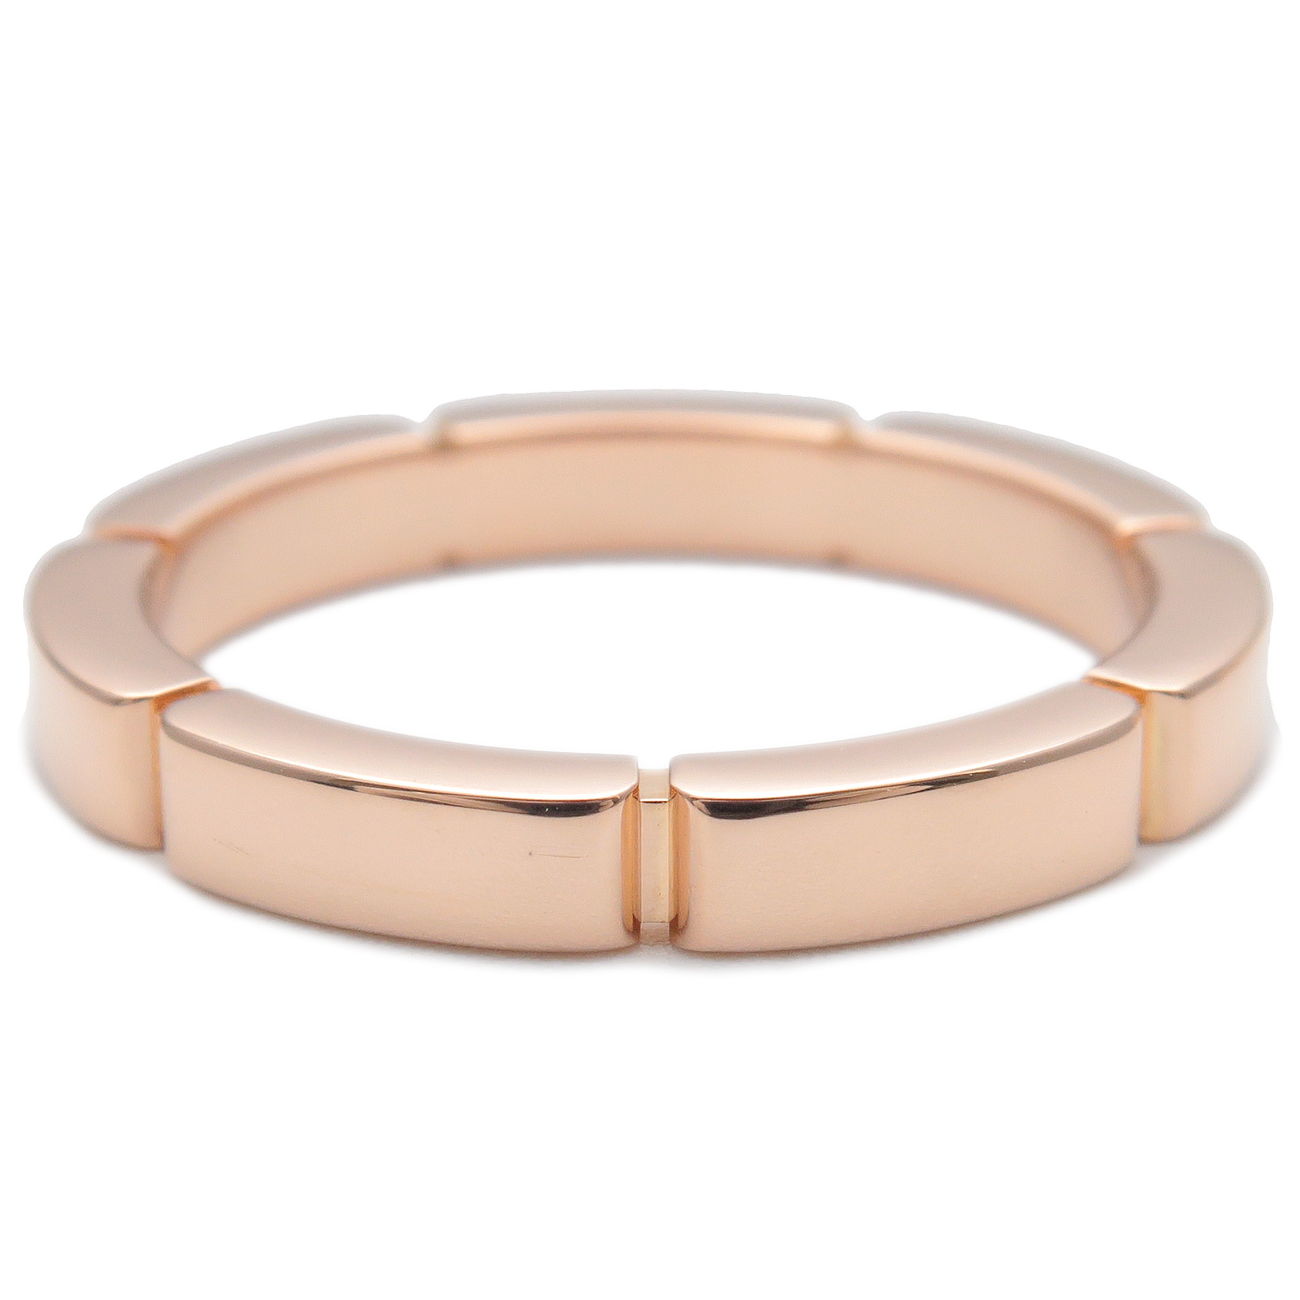 Cartier Maillon Panthere 4P Diamond Ring K18 Rose Gold #50 US5-5.5